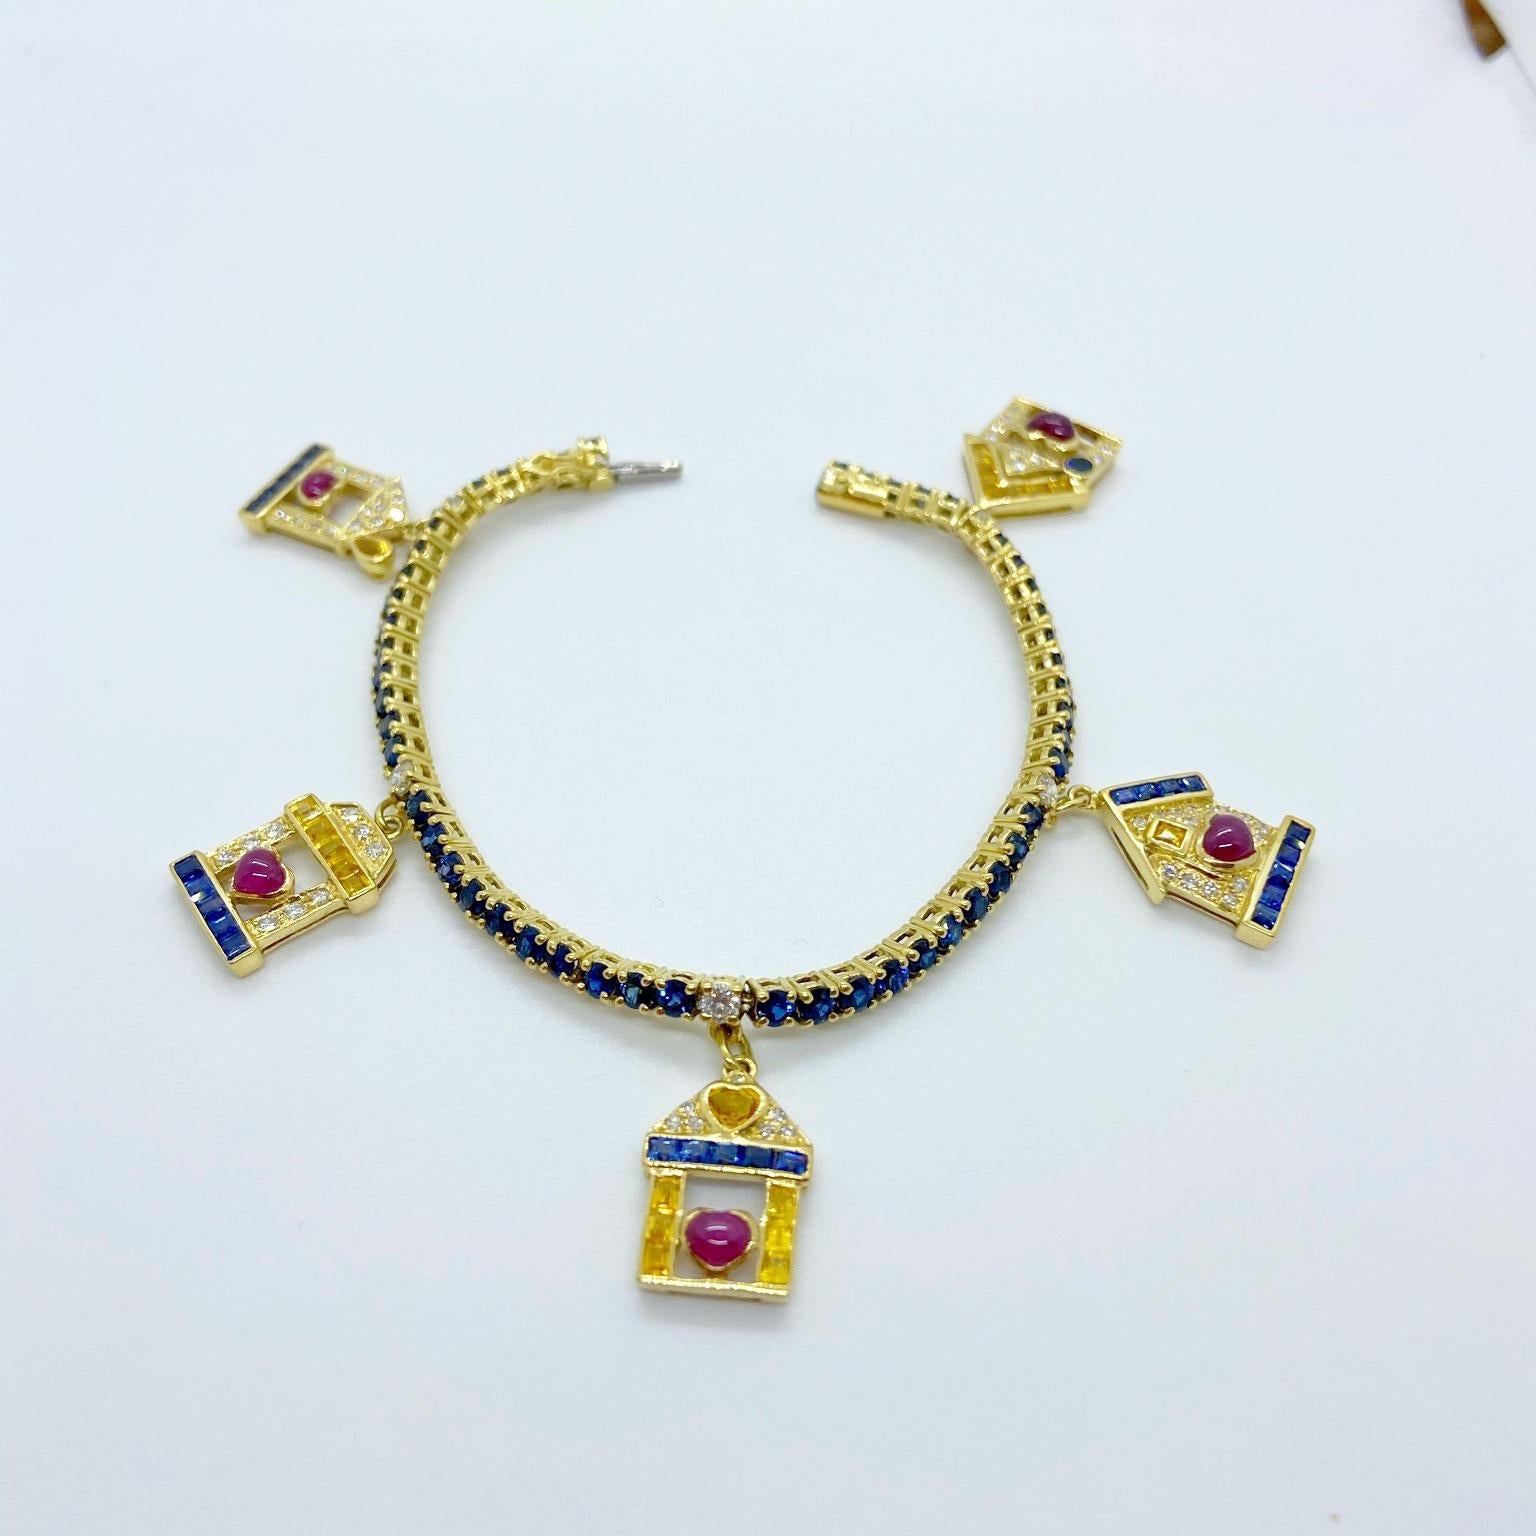 Created by the famed jewelers Sabbadini of Italy, this 18KT yellow gold charm bracelet is quite the unique piece displaying the message,